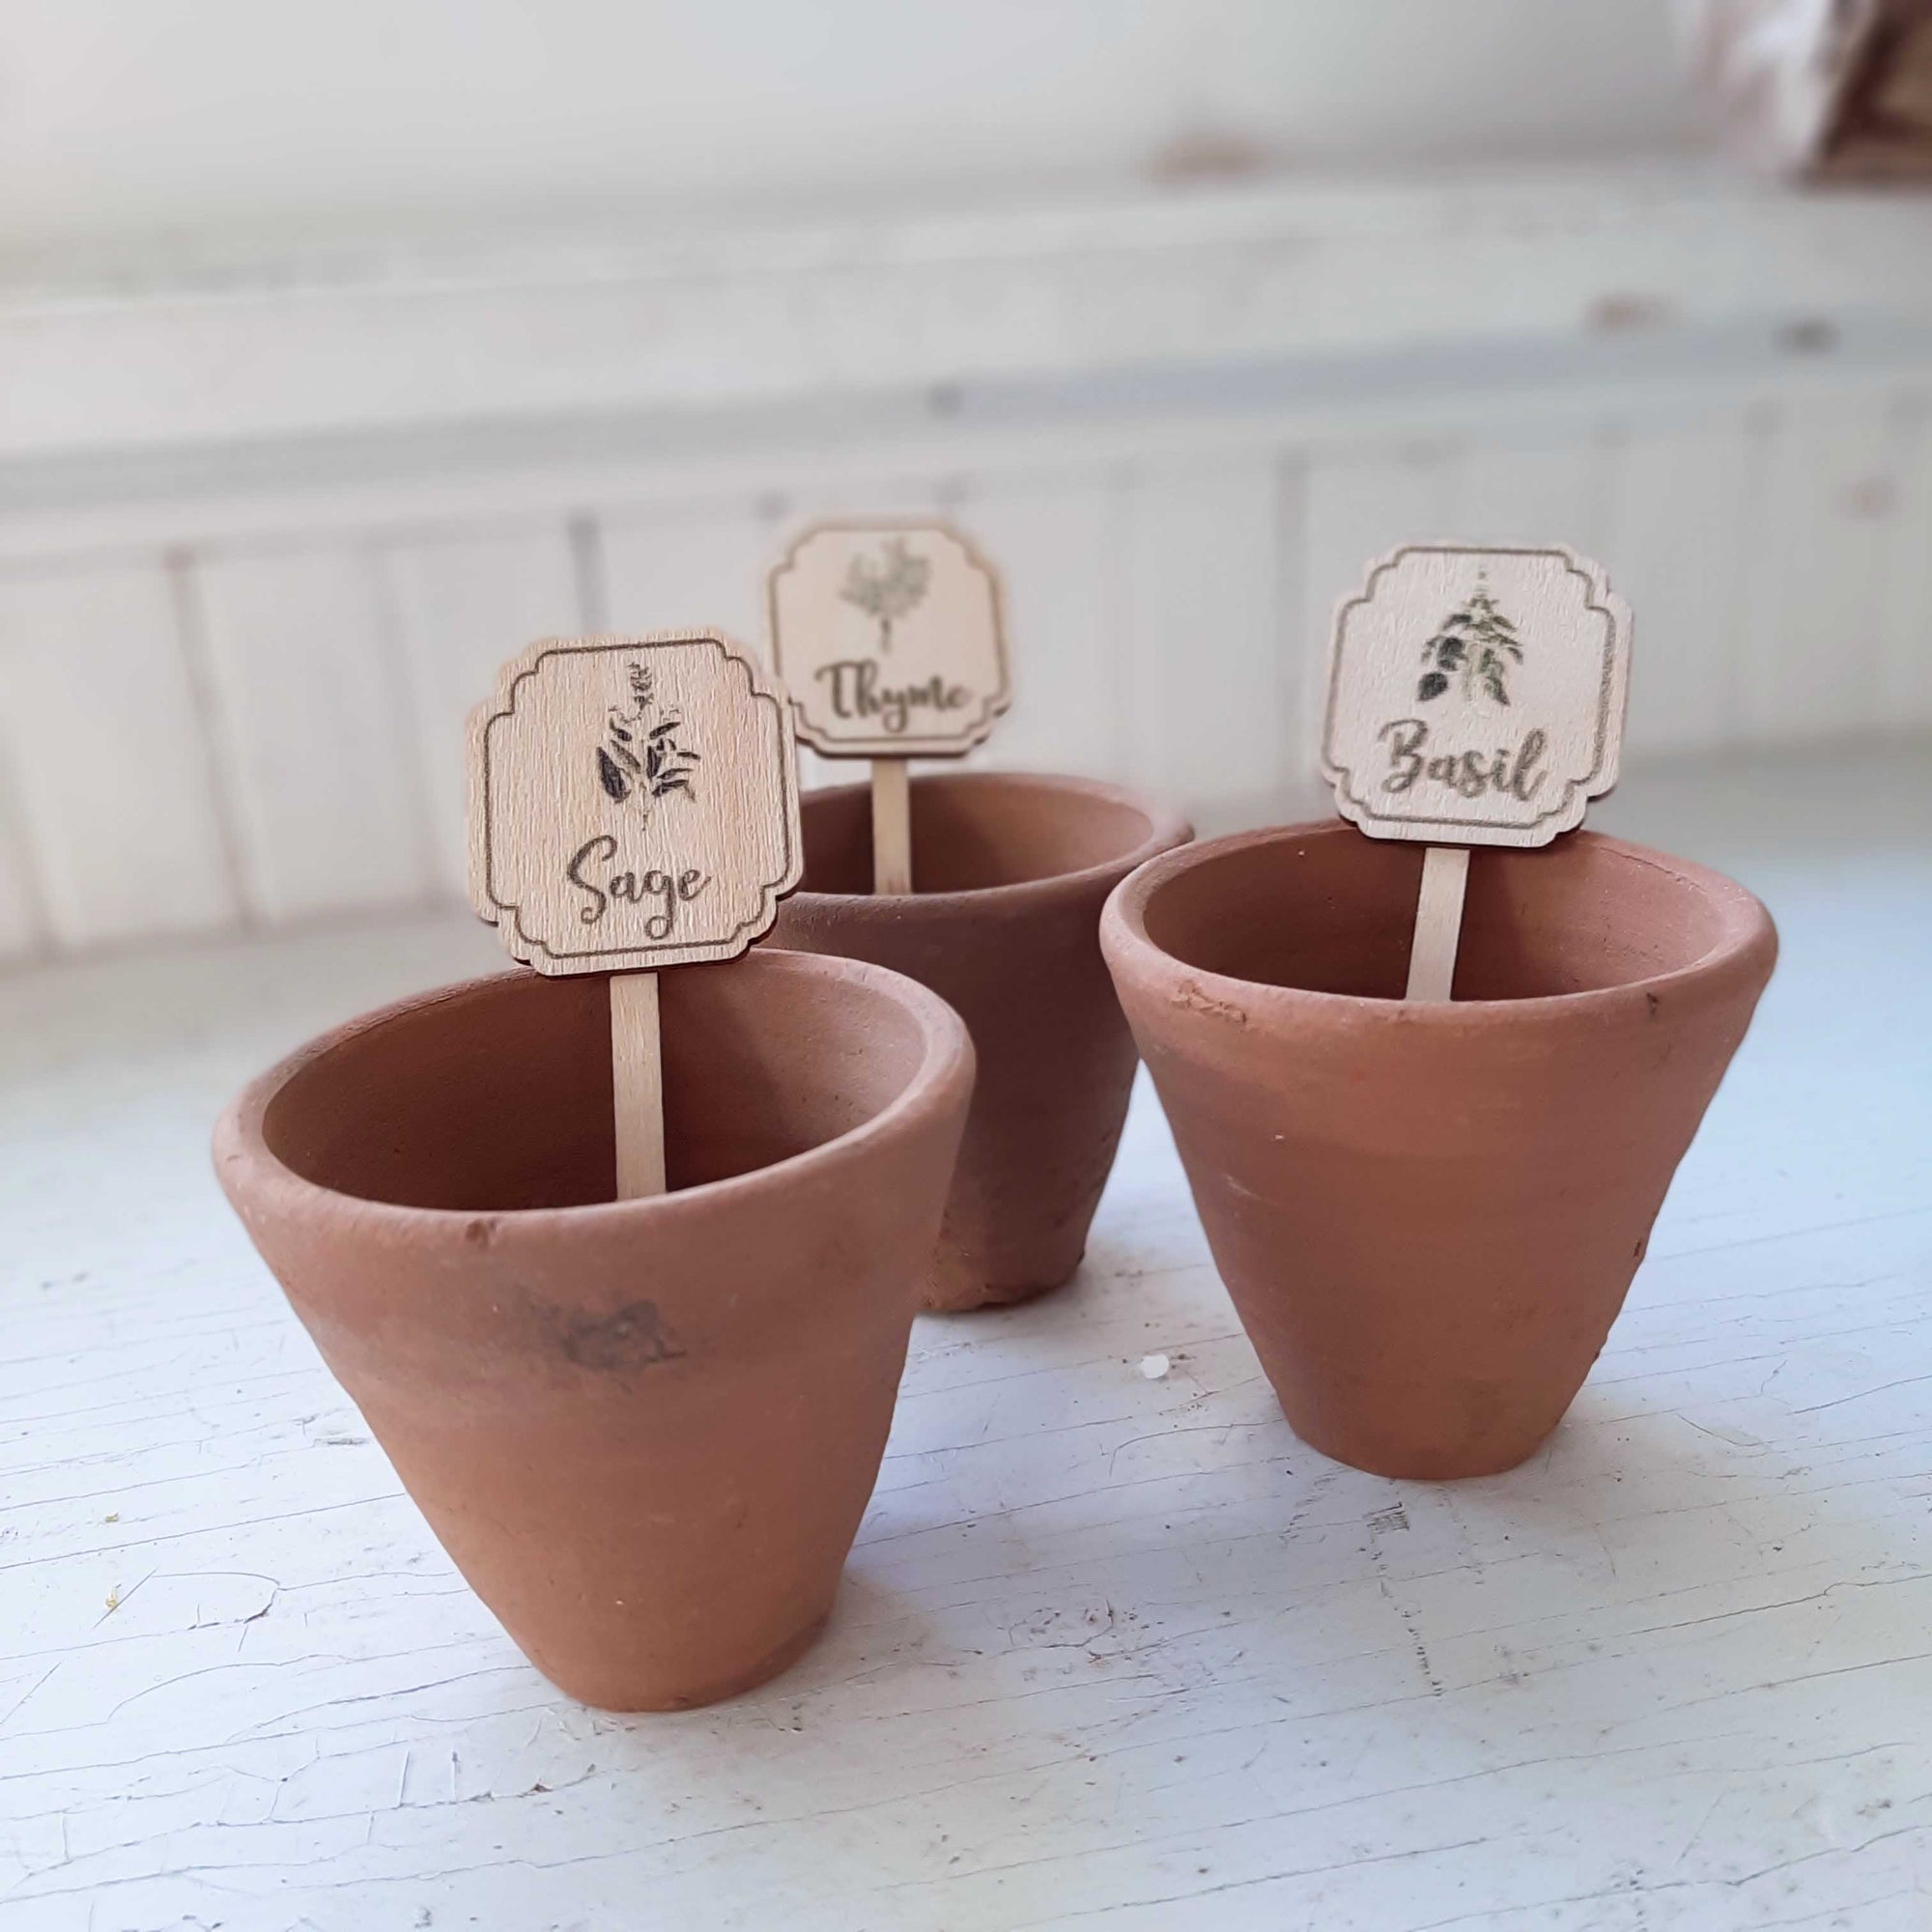 Our Mini Terracotta Pots make a great accent for any shelf or tabletop. Each pot looks weathered and worn, as though it was just found in the corner of an old potting shed. Start seeds or stack them on a shelf for a rustic look. Pots do not include hole for drainage. Set of three. Herb Markers sold separately. Color and shape may vary. 2.75" Diam x 2.5"H